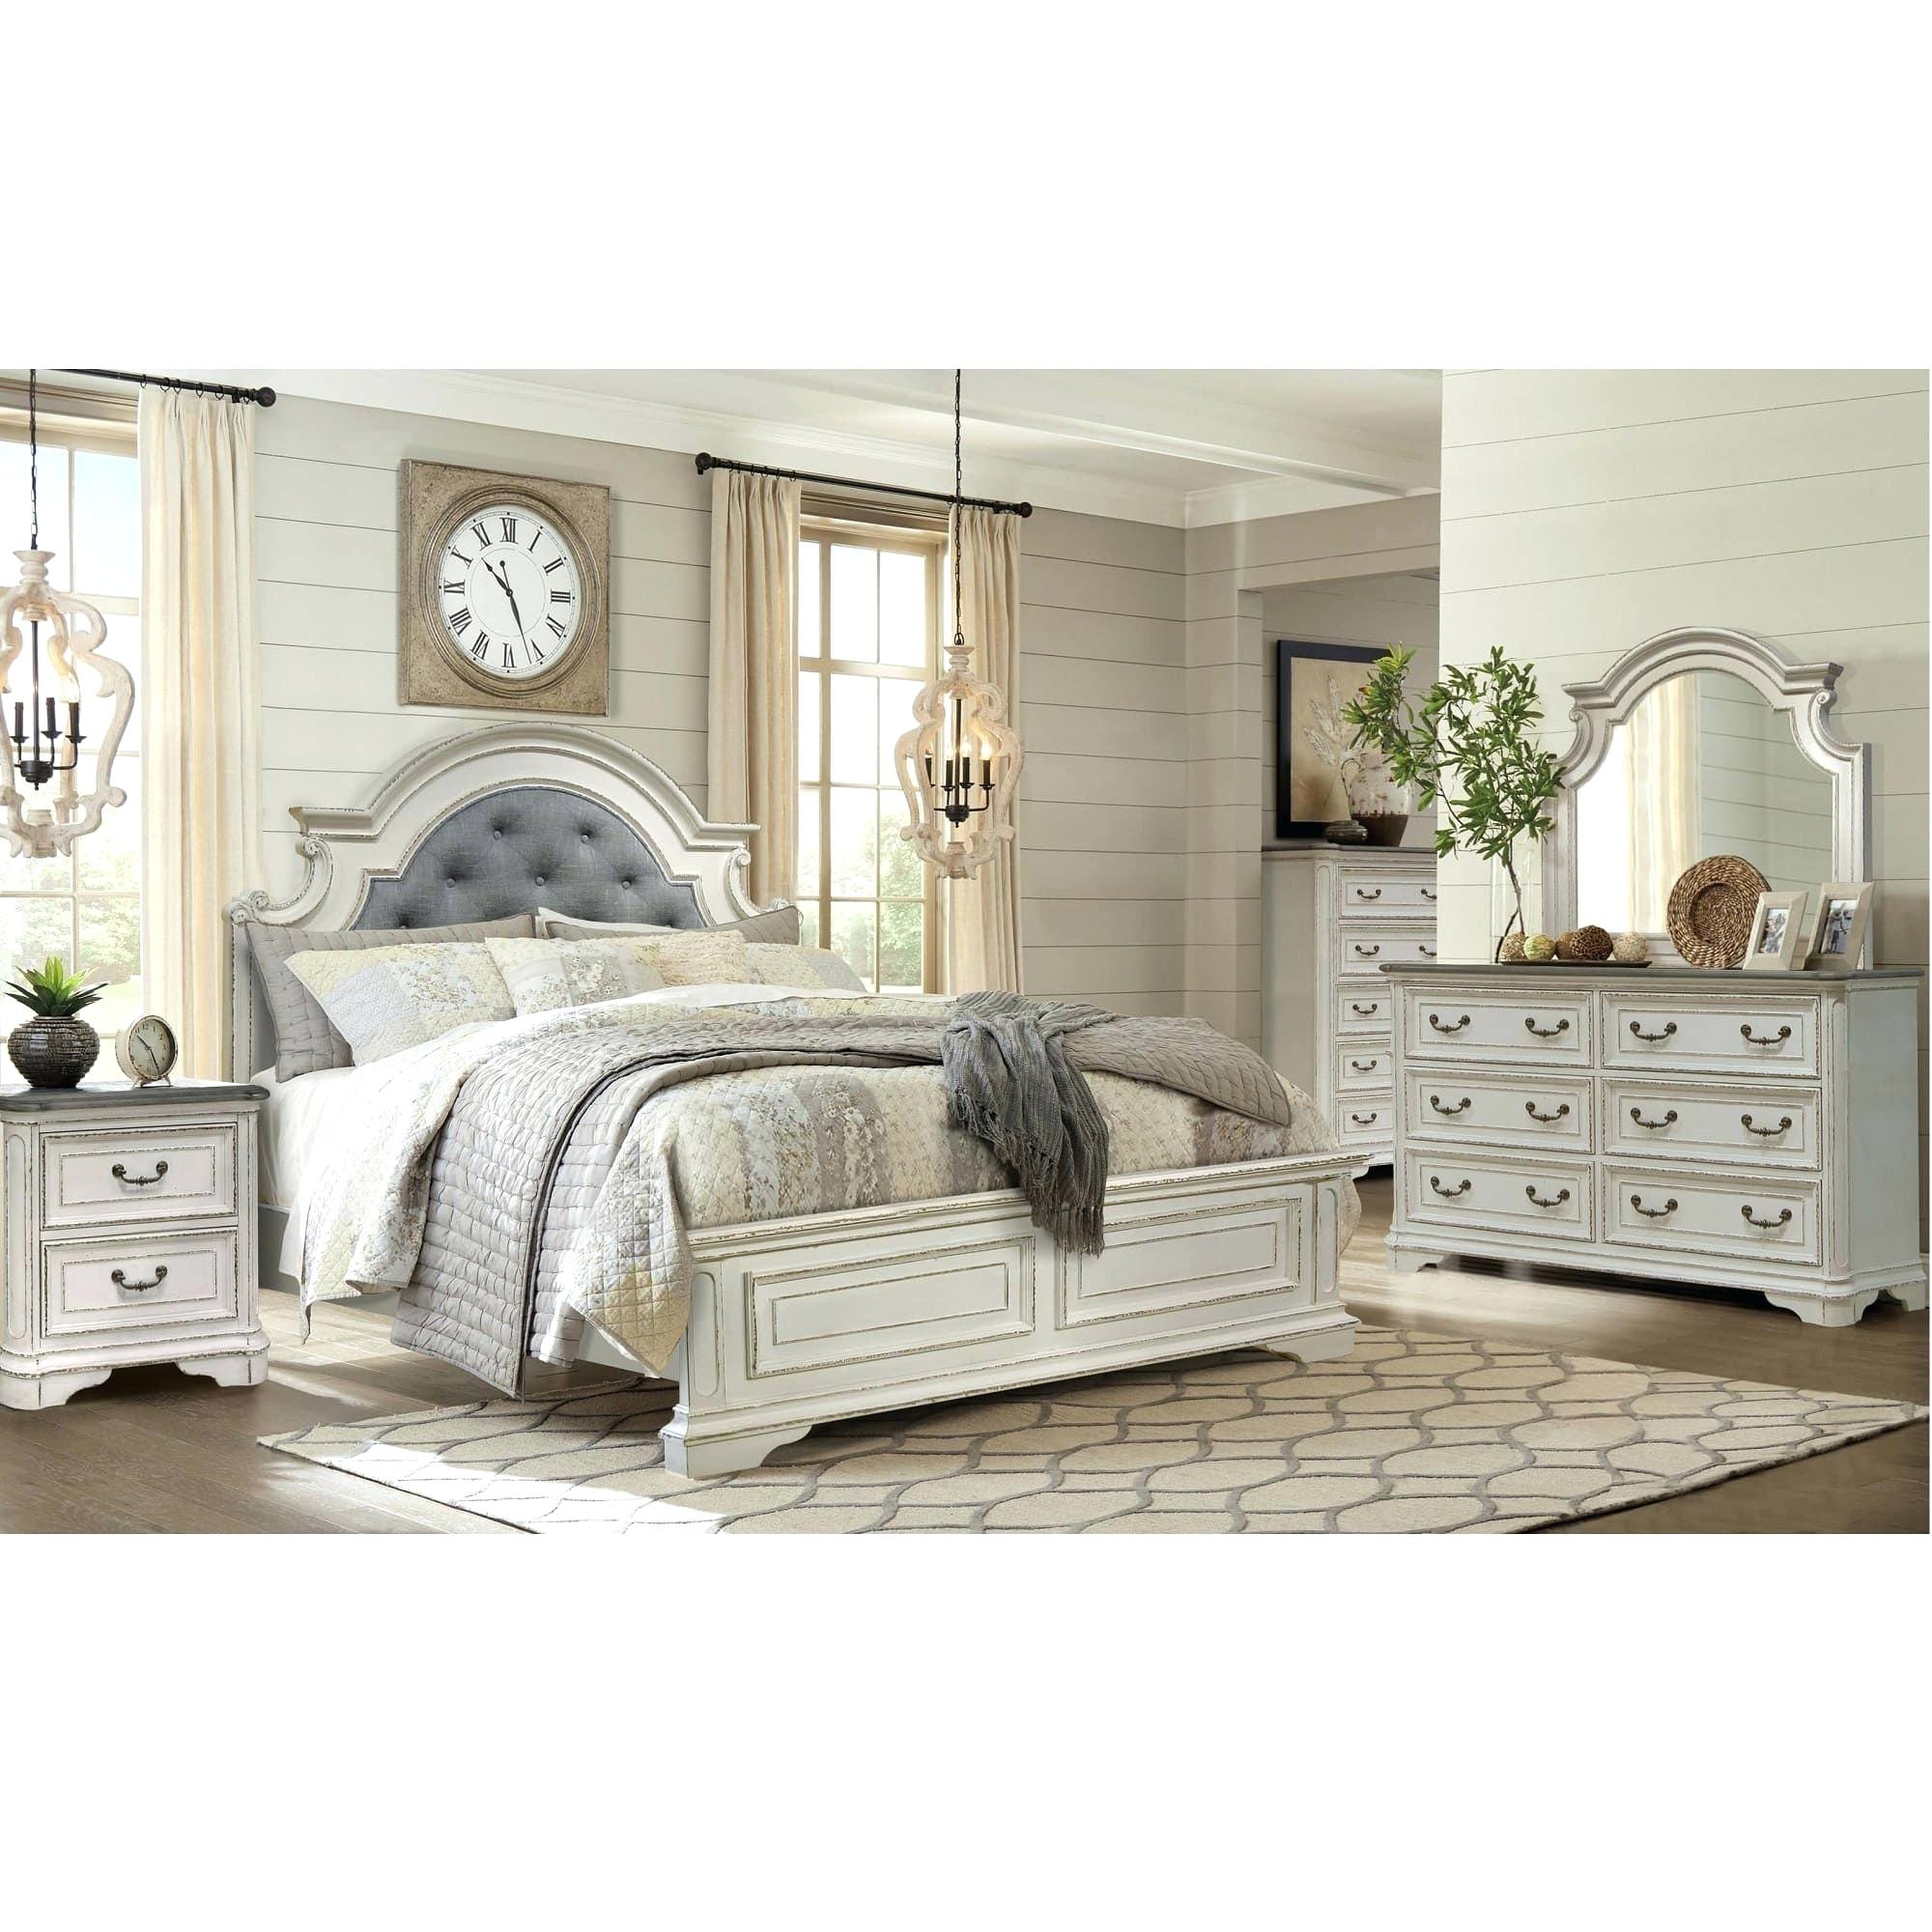 Bedroom Sets Furniture 7 Piece Queen Bedroom Collection Furniture with regard to size 2000 X 2000